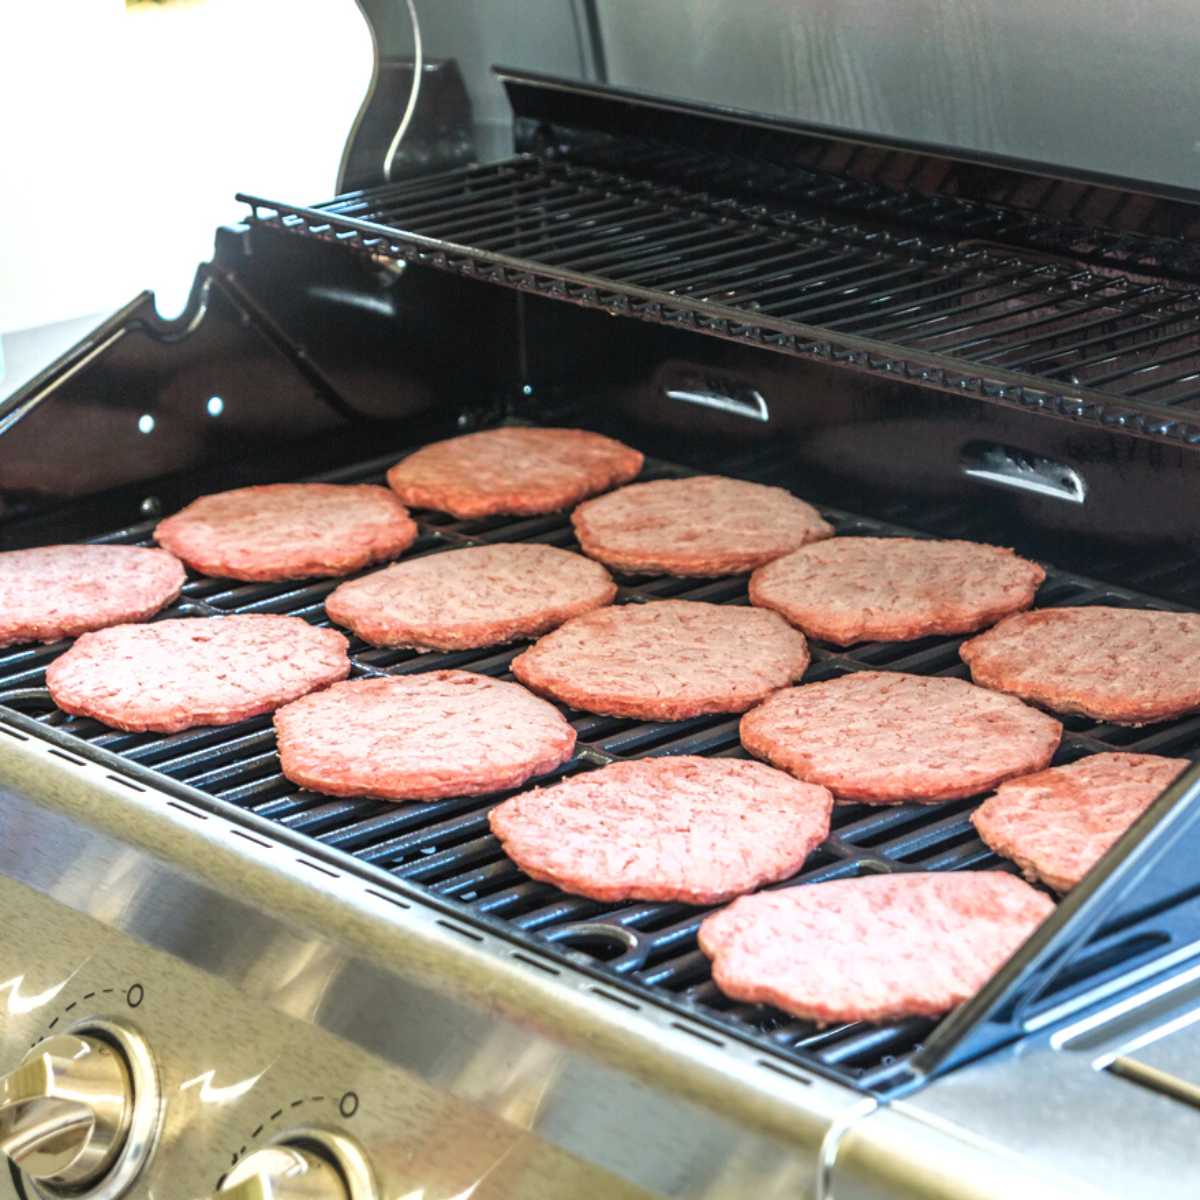 https://theonlinegrill.com/wp-content/uploads/grilled-frozen-burgers.jpg